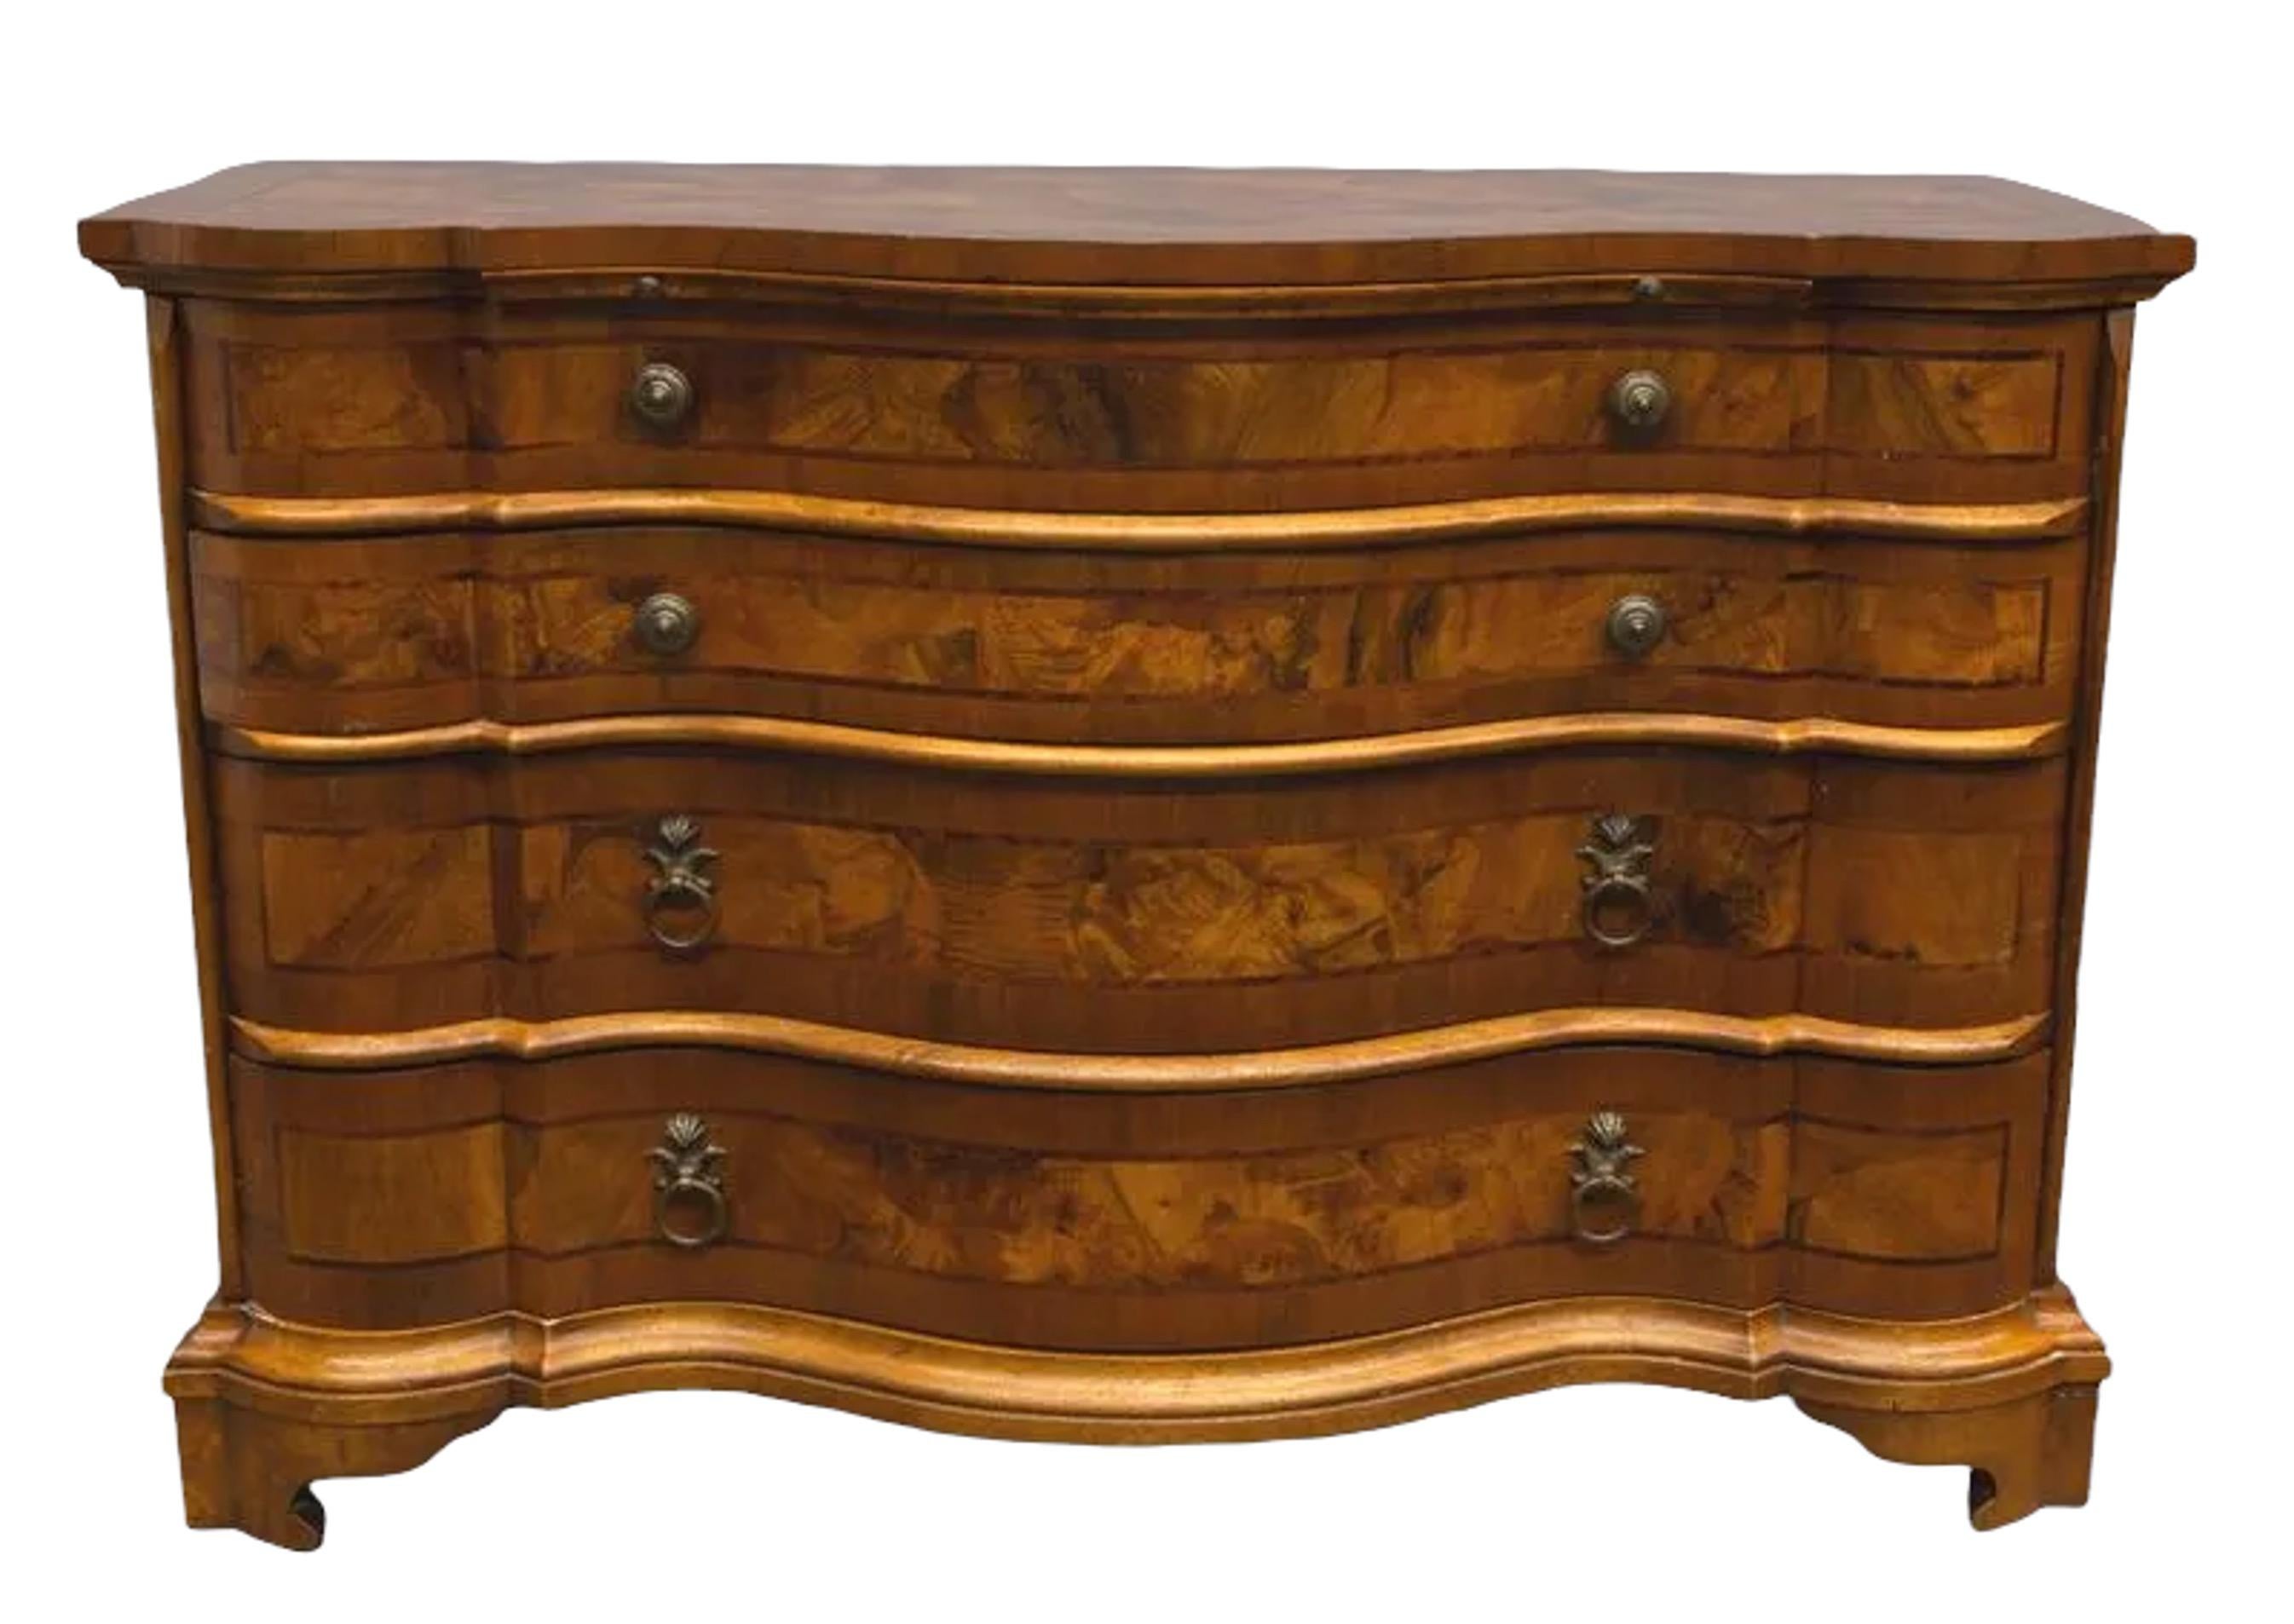 18th century (Circa 1750s) German oxbow shaped walnut commode with ash and fruitwood panels and inlay. The shaped top with three conforming drawers, standing on bun feet. High quality and incredible carving, one of the most expensive types of wood,